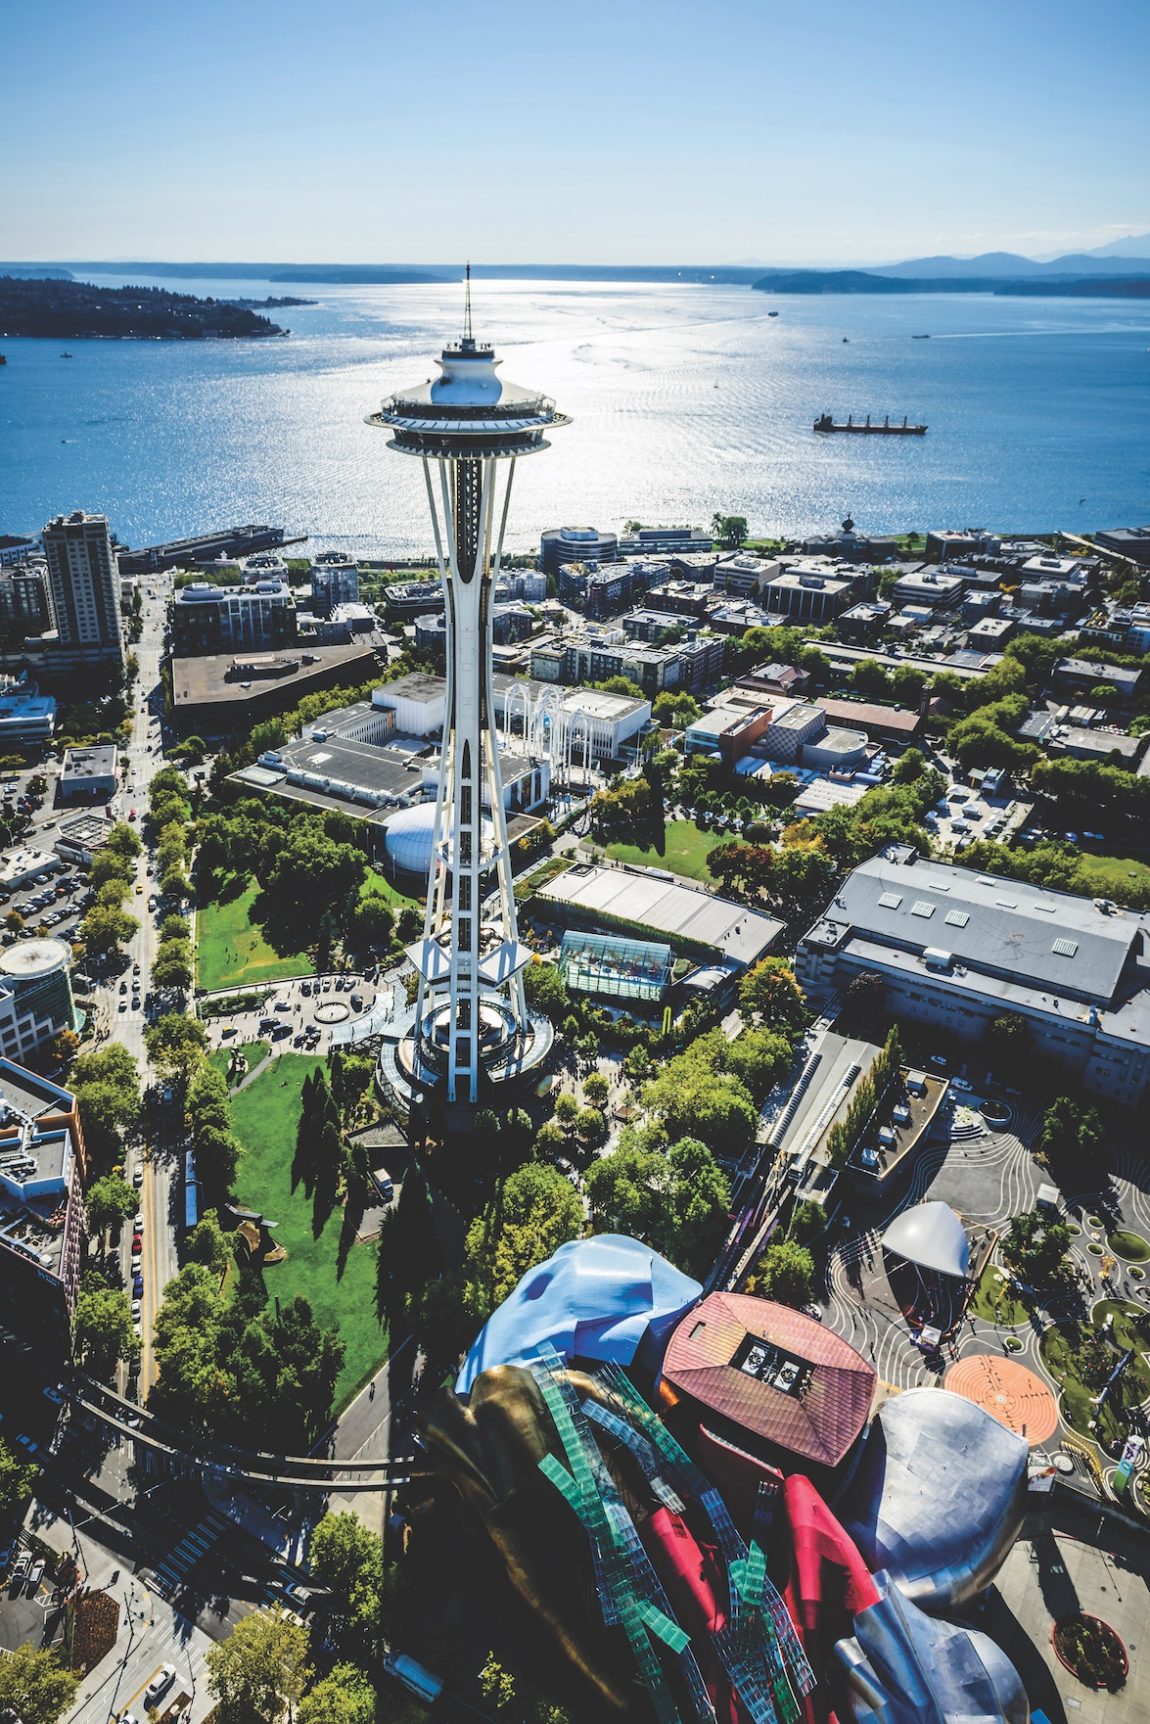 Seattle Space Needle, a monument